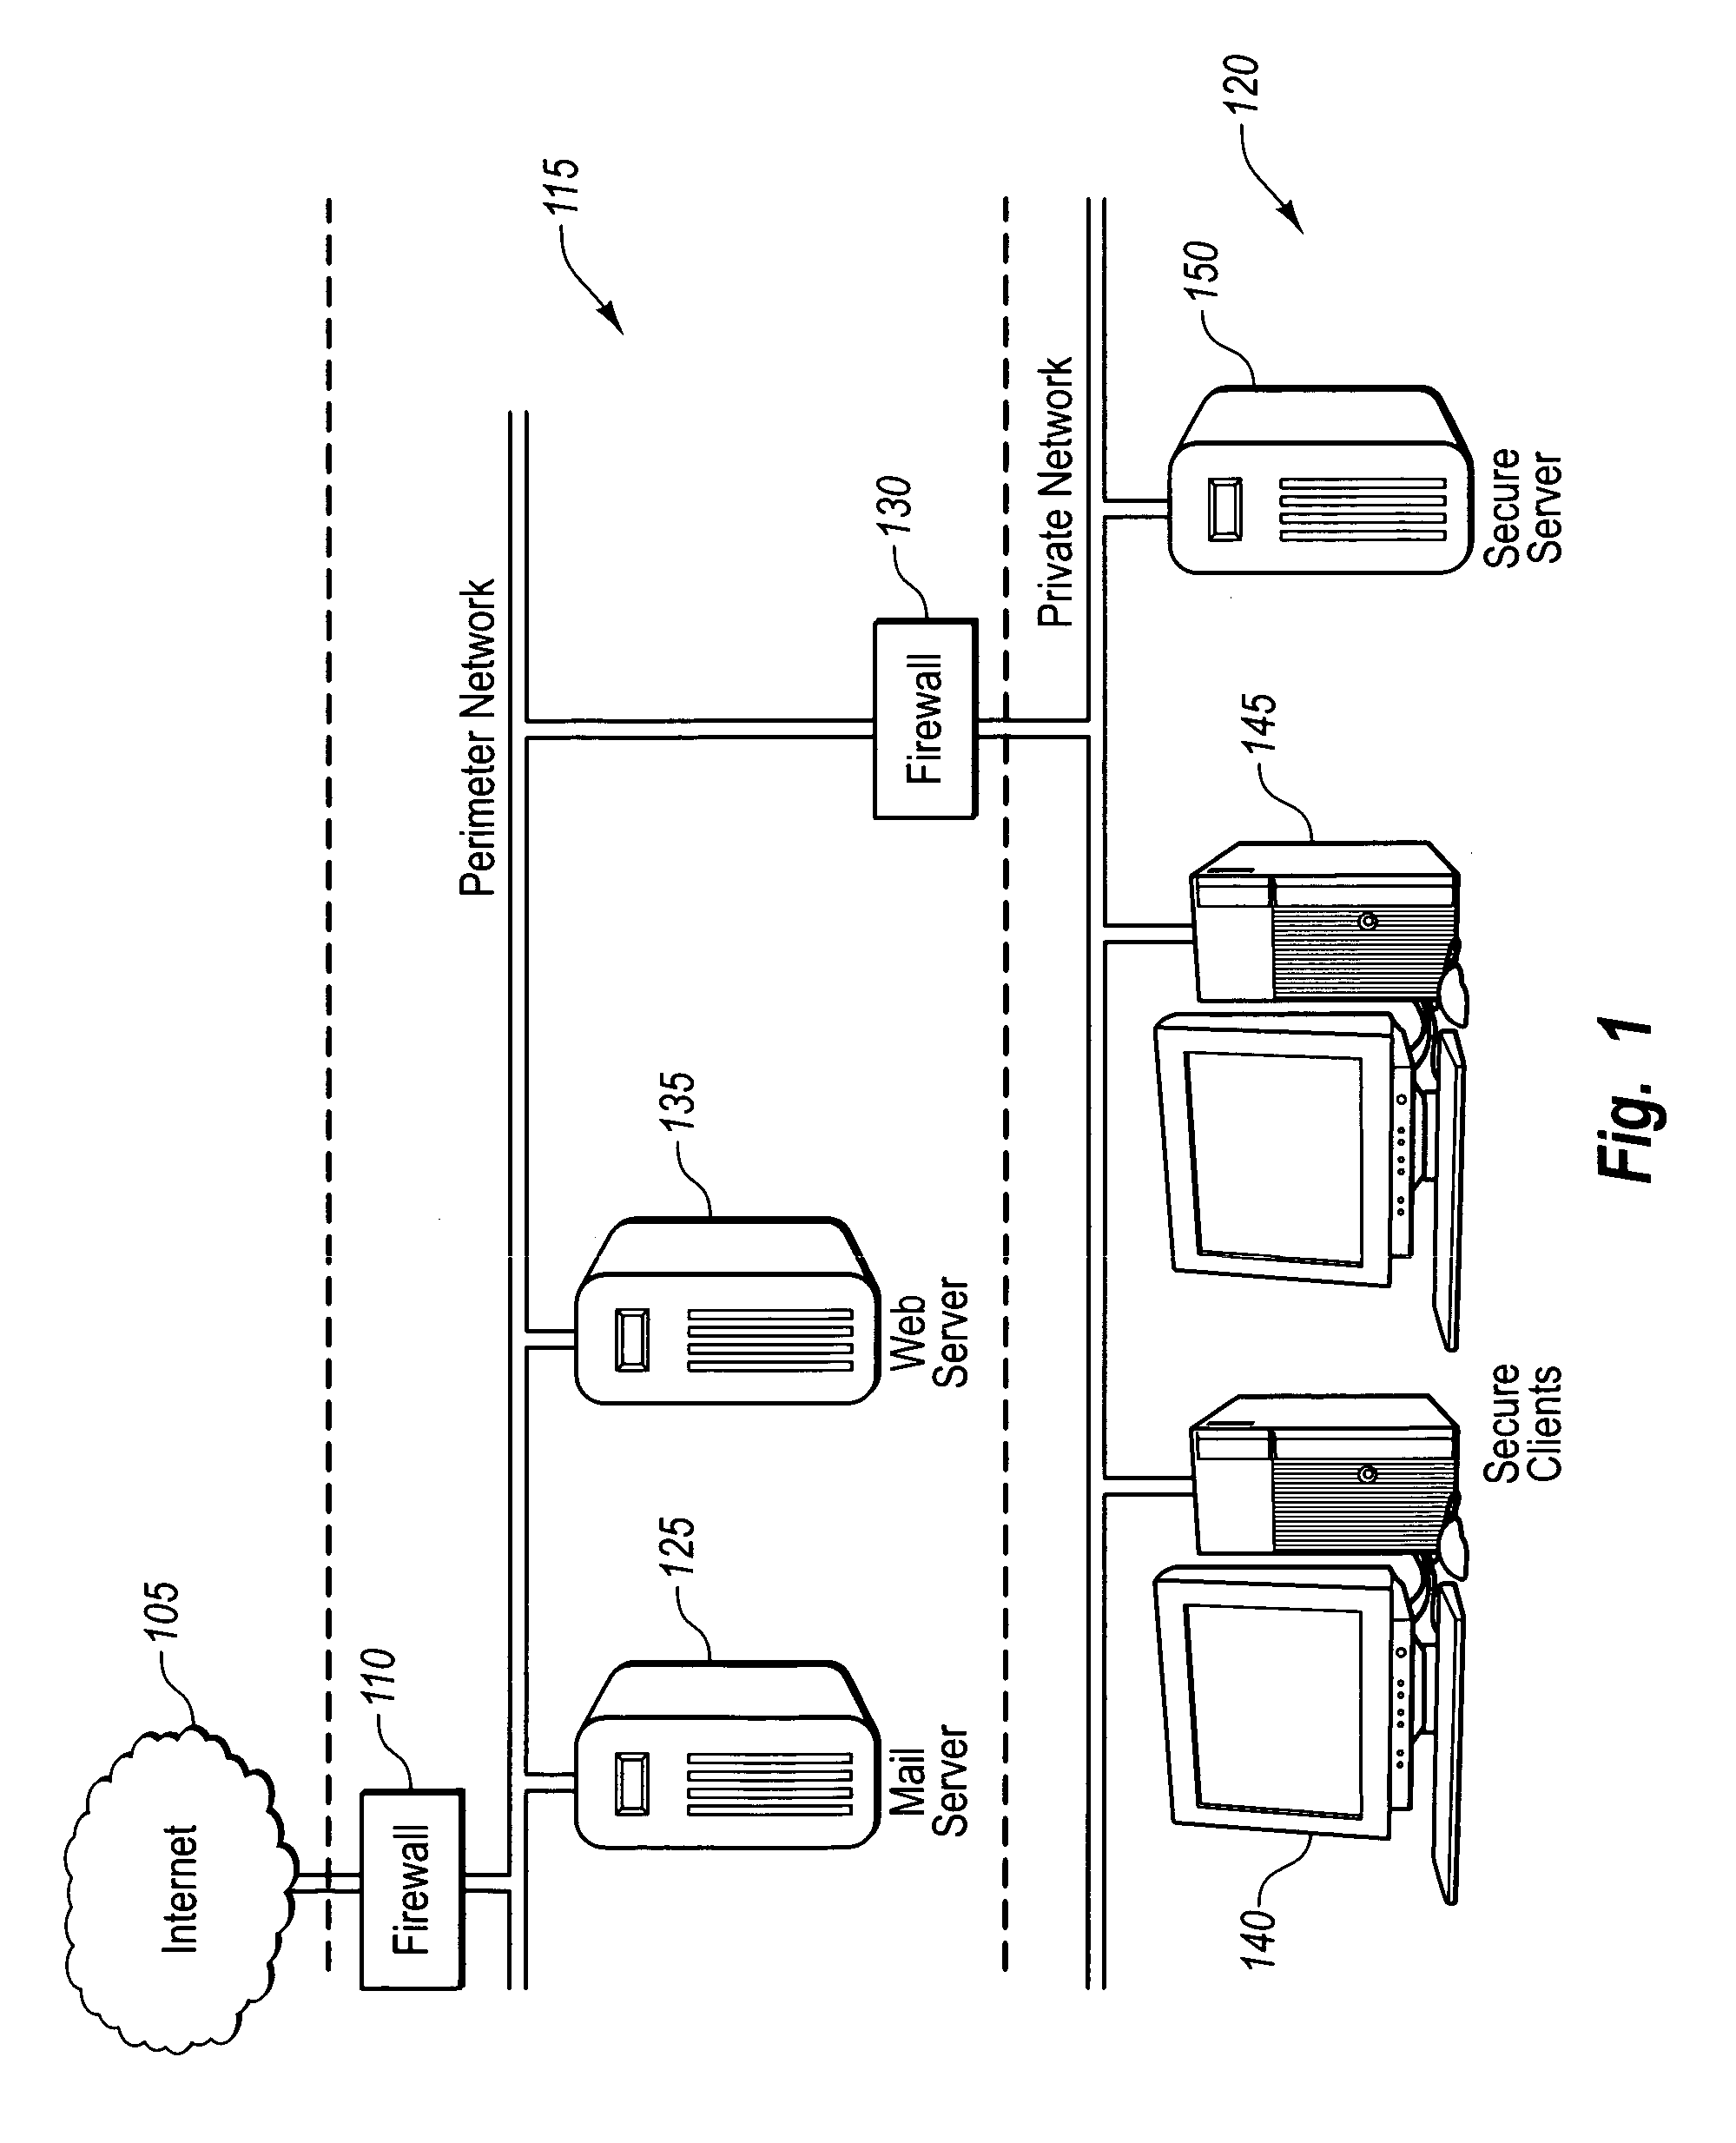 Central console for monitoring configuration status for remote devices